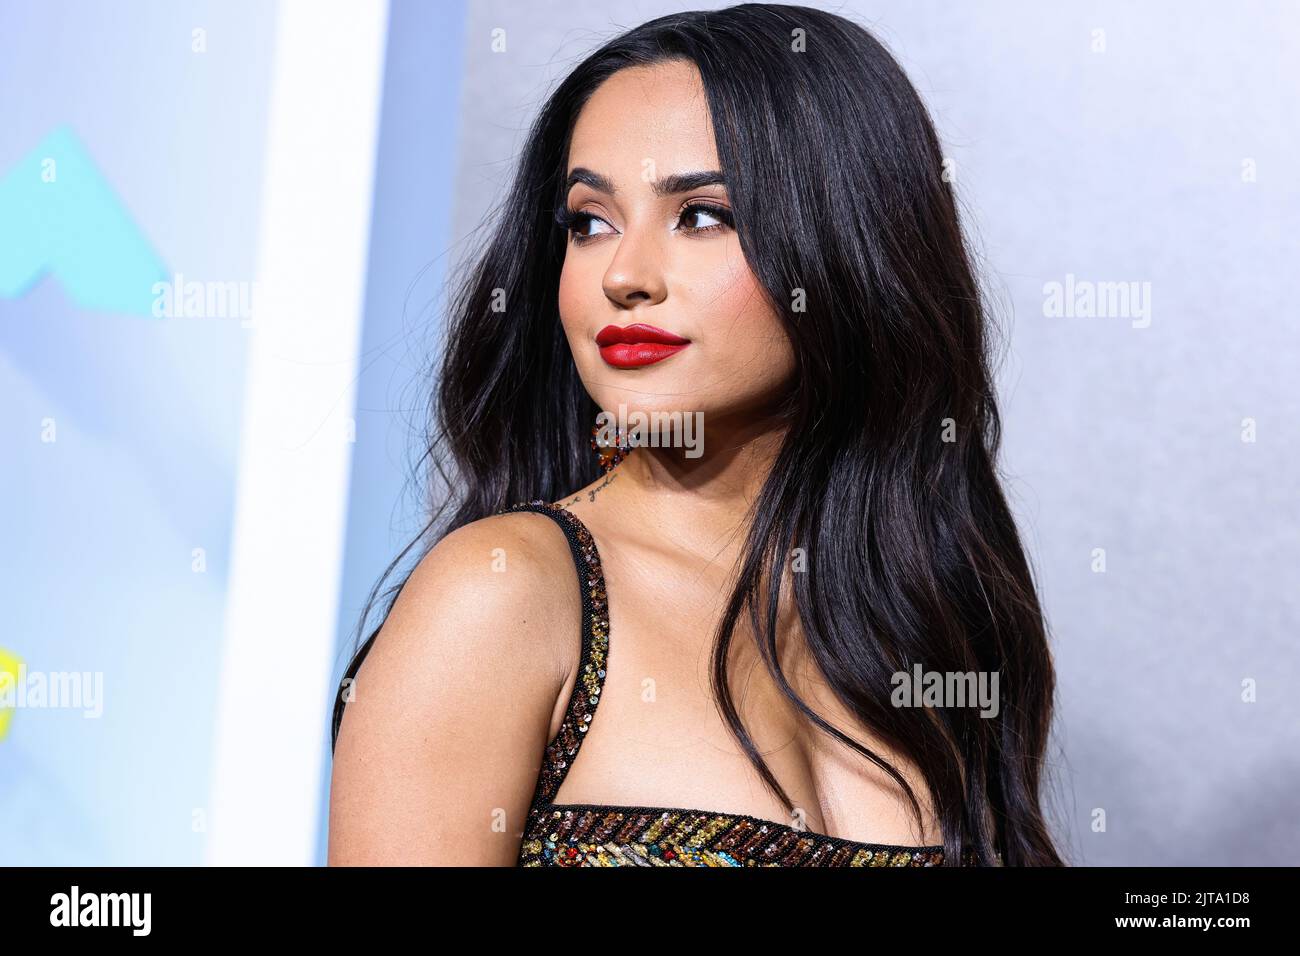 NEWARK, NEW JERSEY, USA - AUGUST 28: Becky G arrives at the 2022 MTV Video Music Awards held at the Prudential Center on August 28, 2022 in Newark, New Jersey, USA. (Photo by Xavier Collin/Image Press Agency) Stock Photo